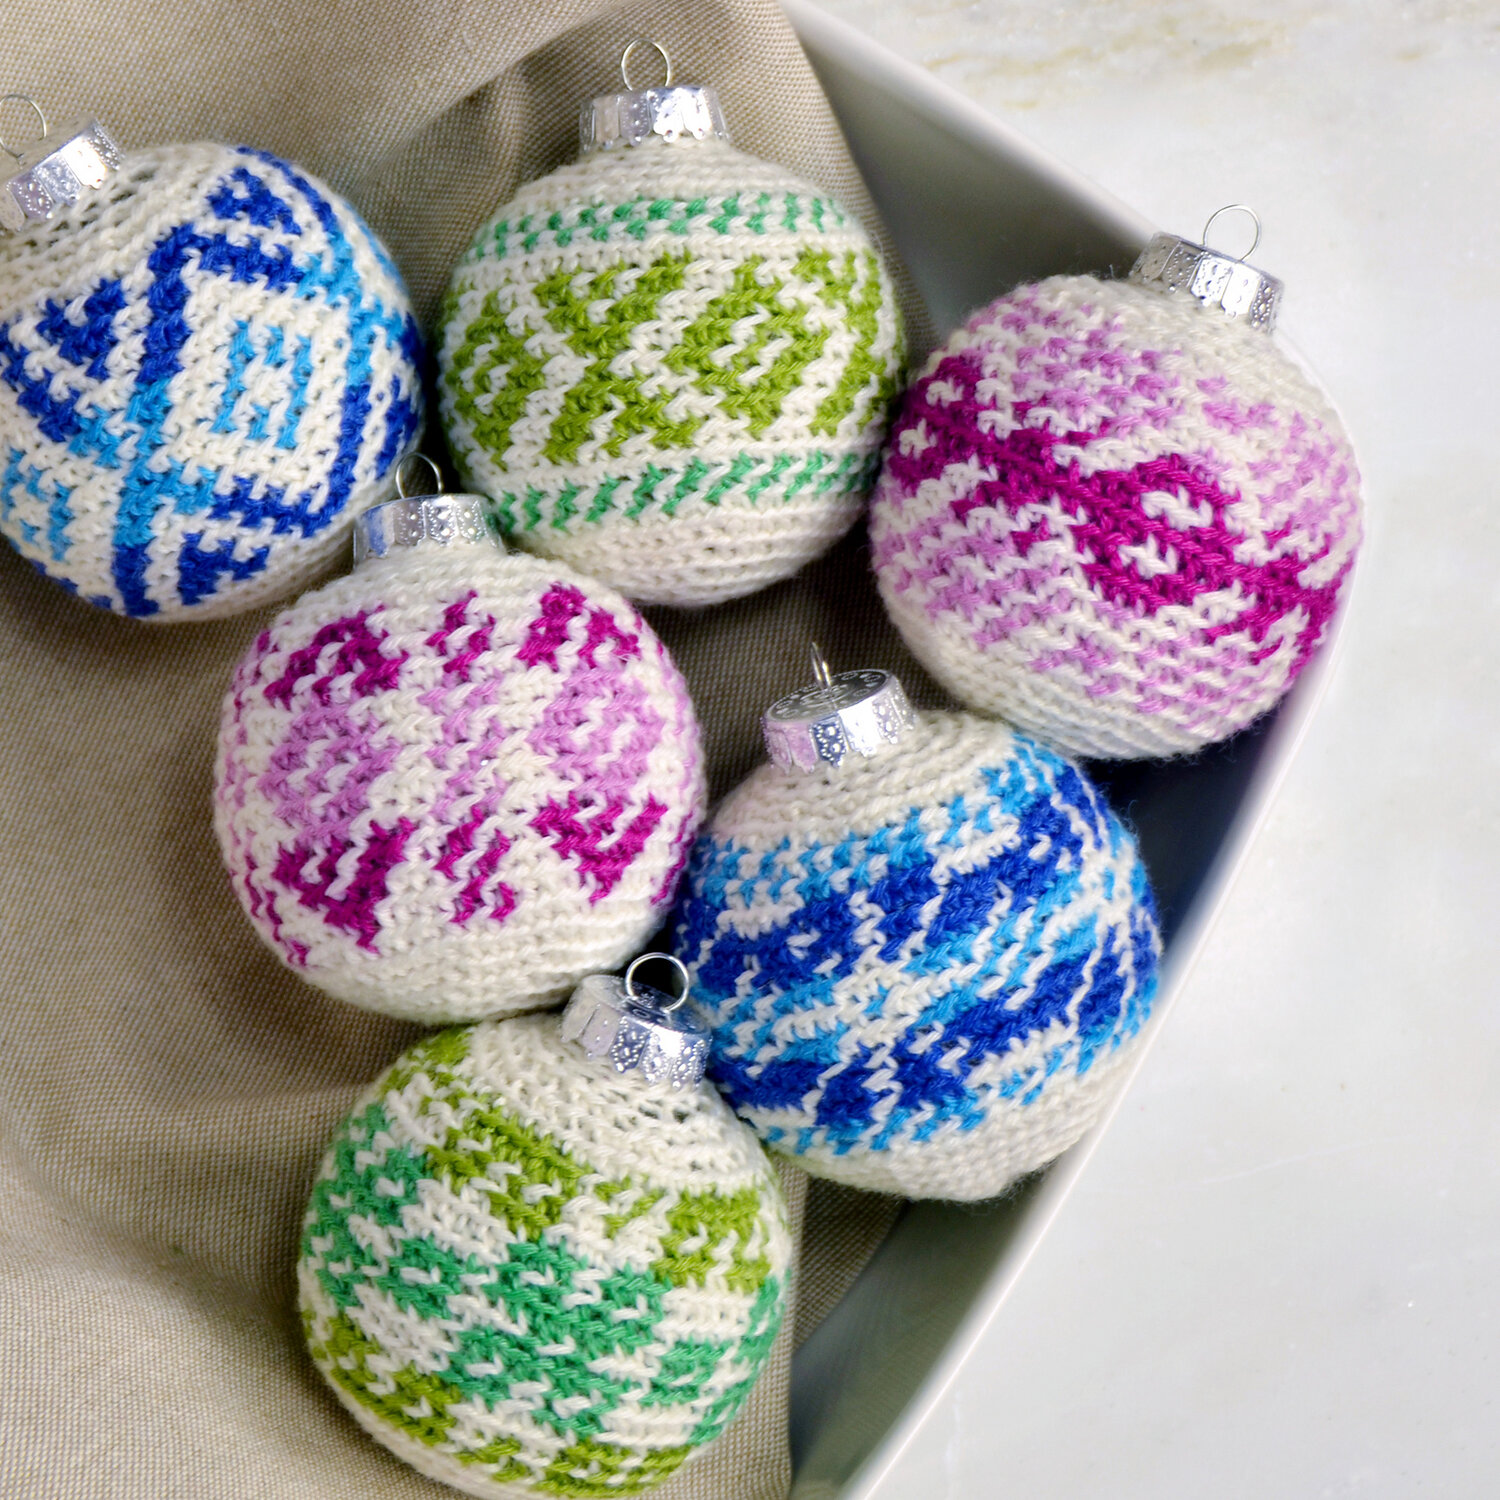 crochet pattern work ornaments in pink, blue, and green